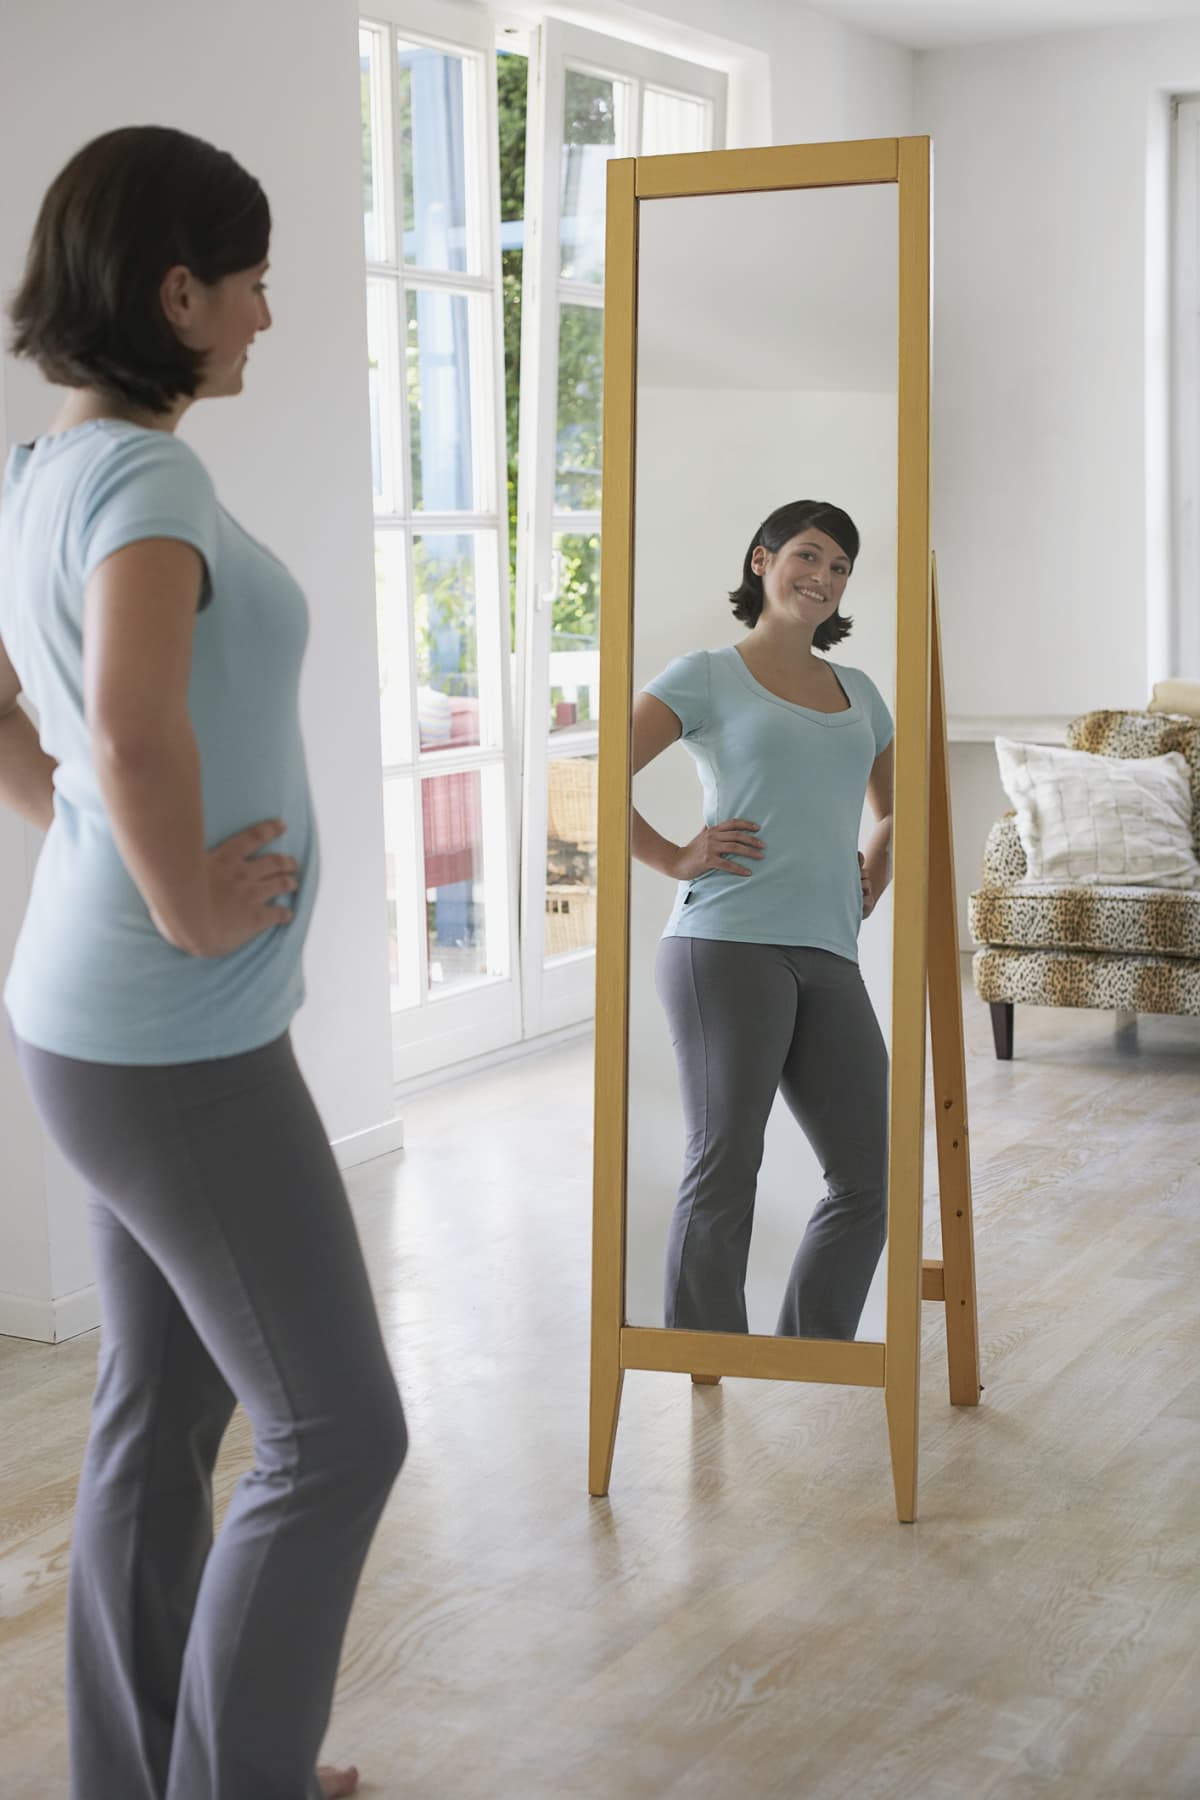 Woman looking at her reflection in a full body mirror with her hands on her hips and smiling